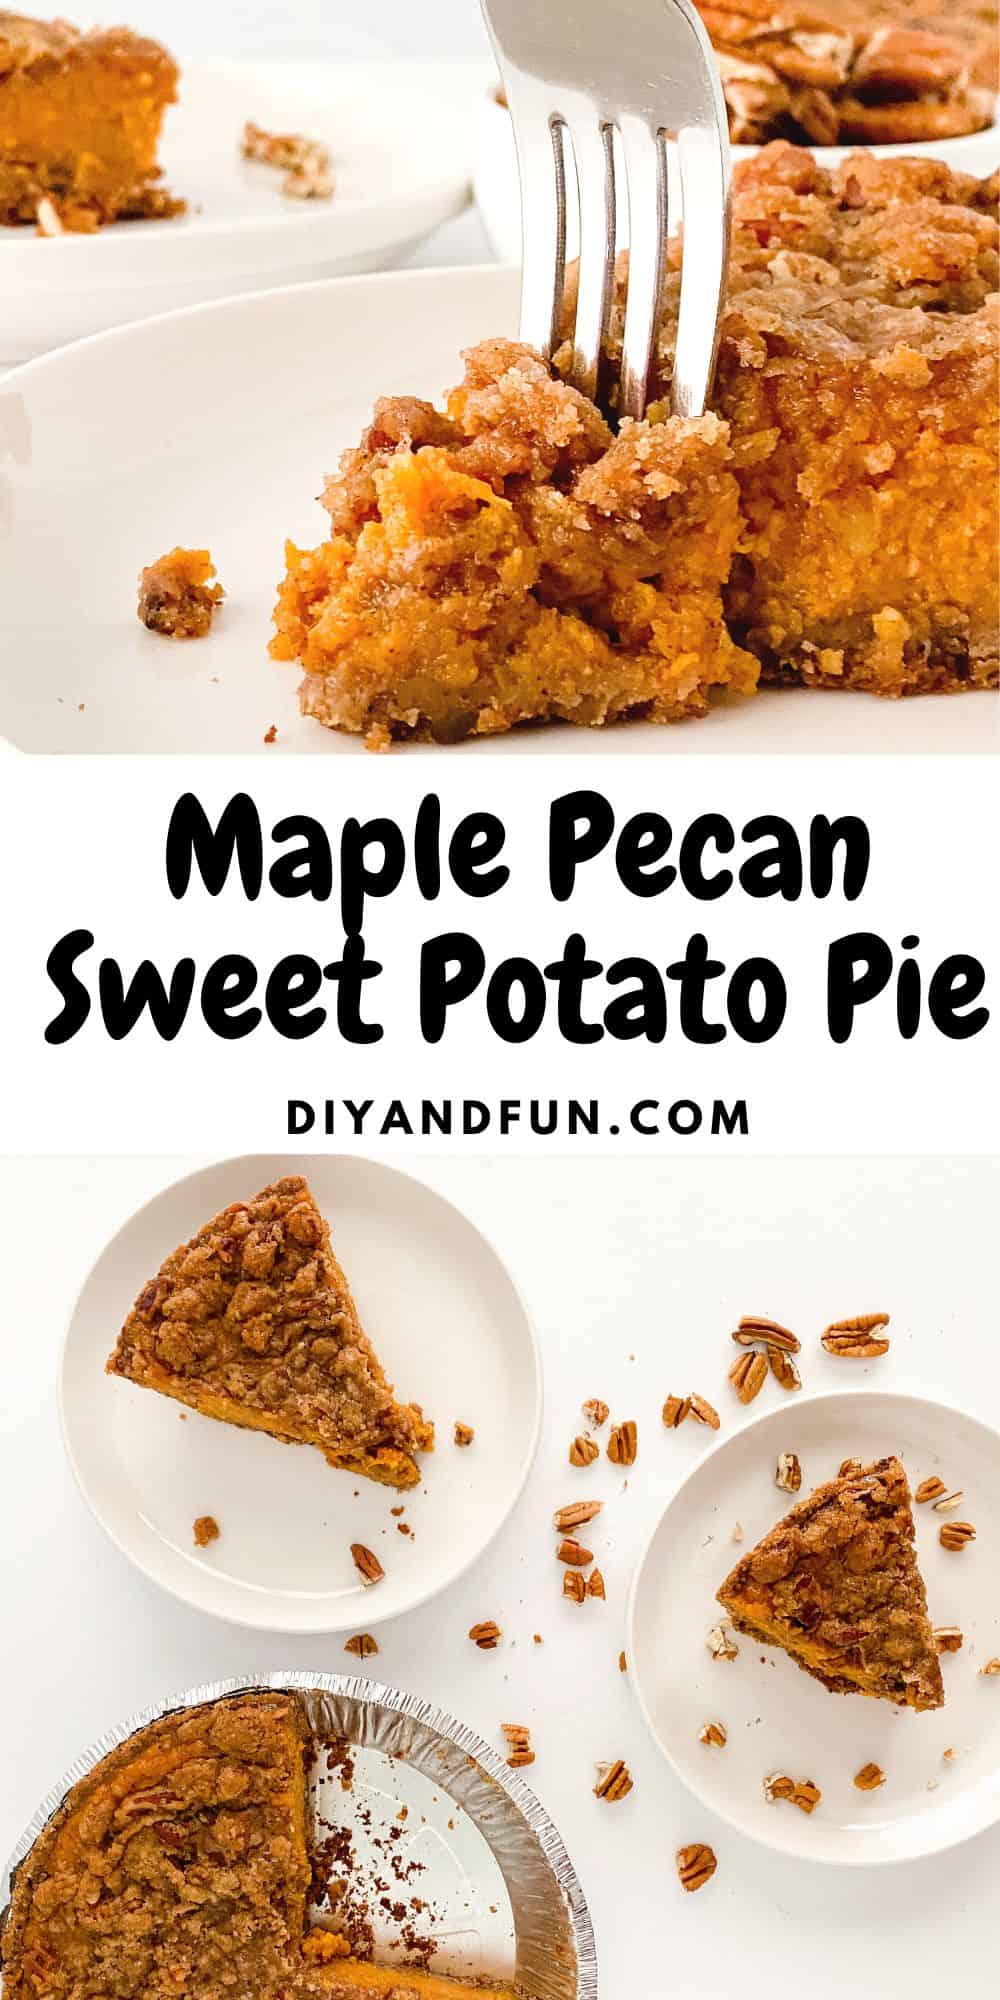 Maple Pecan Sweet Potato Pie, a simple dessert recipe made with sweet potatoes and topped with a crunchy pecan crisp.